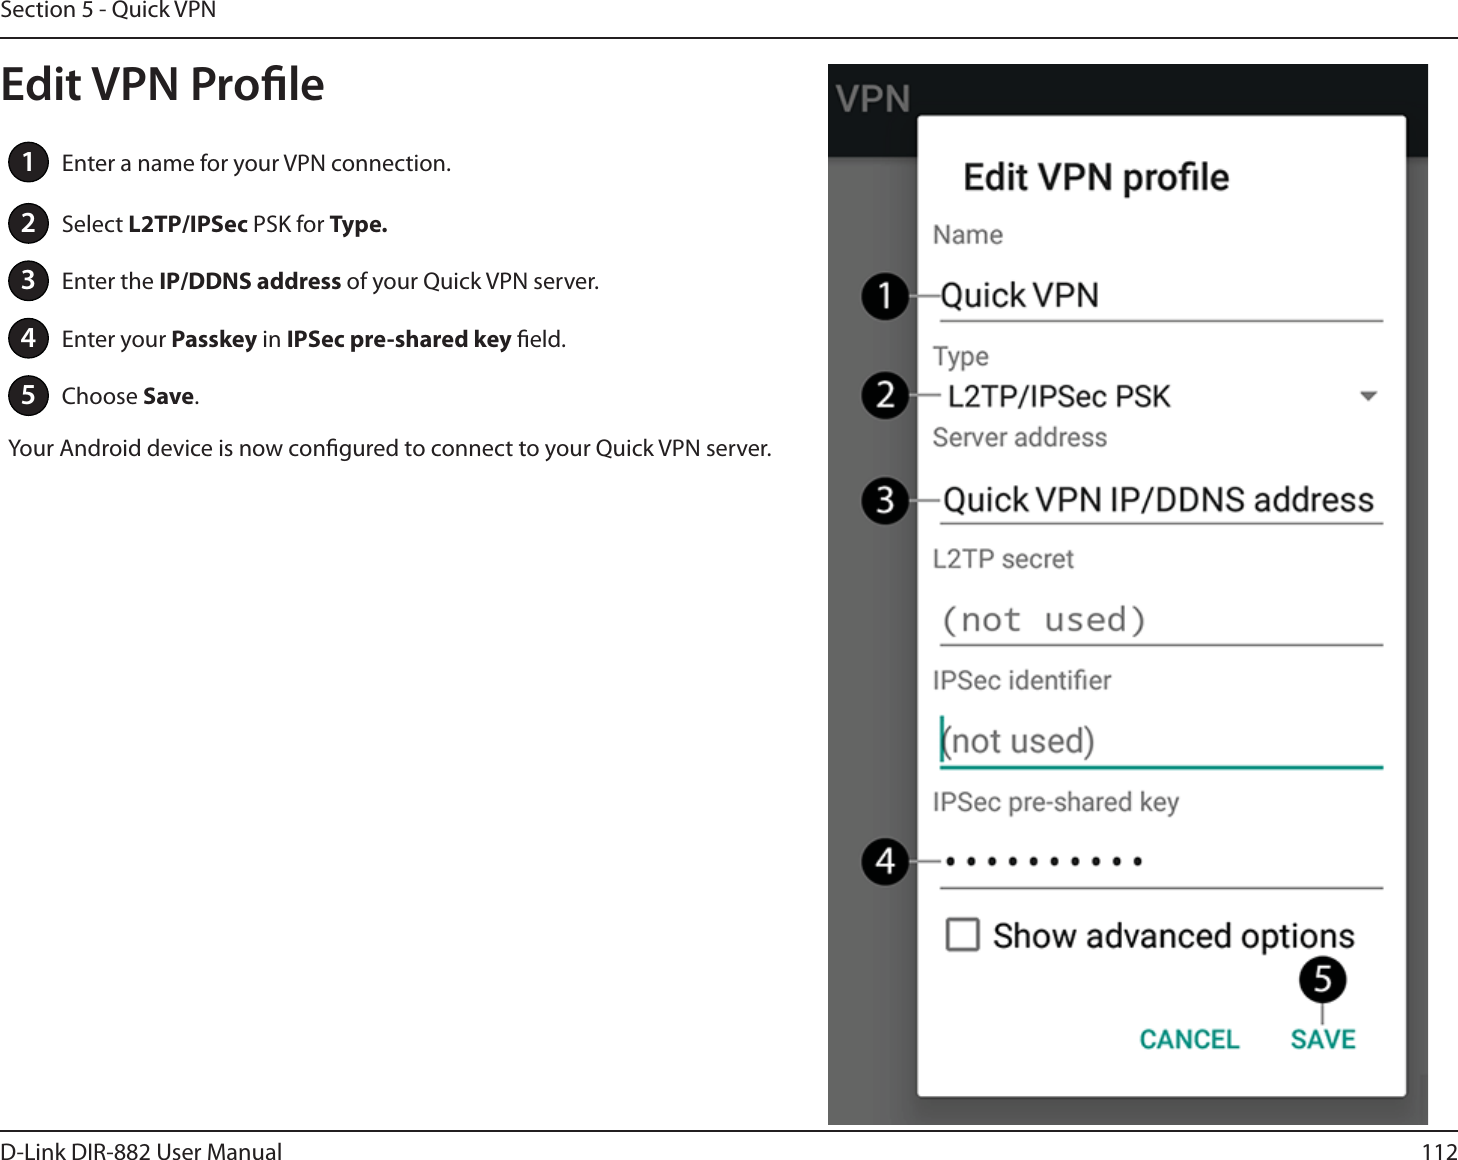 112D-Link DIR-882 User ManualSection 5 - Quick VPN1Enter a name for your VPN connection.2Select -51*14FD PSK for Type.3Enter the *1%%/4BEESFTTof your Quick VPN server.4Enter your Passkey in IPSec pre-shared key eld.5Choose Save.Your Android device is now congured to connect to your Quick VPN server.Edit VPN Prole